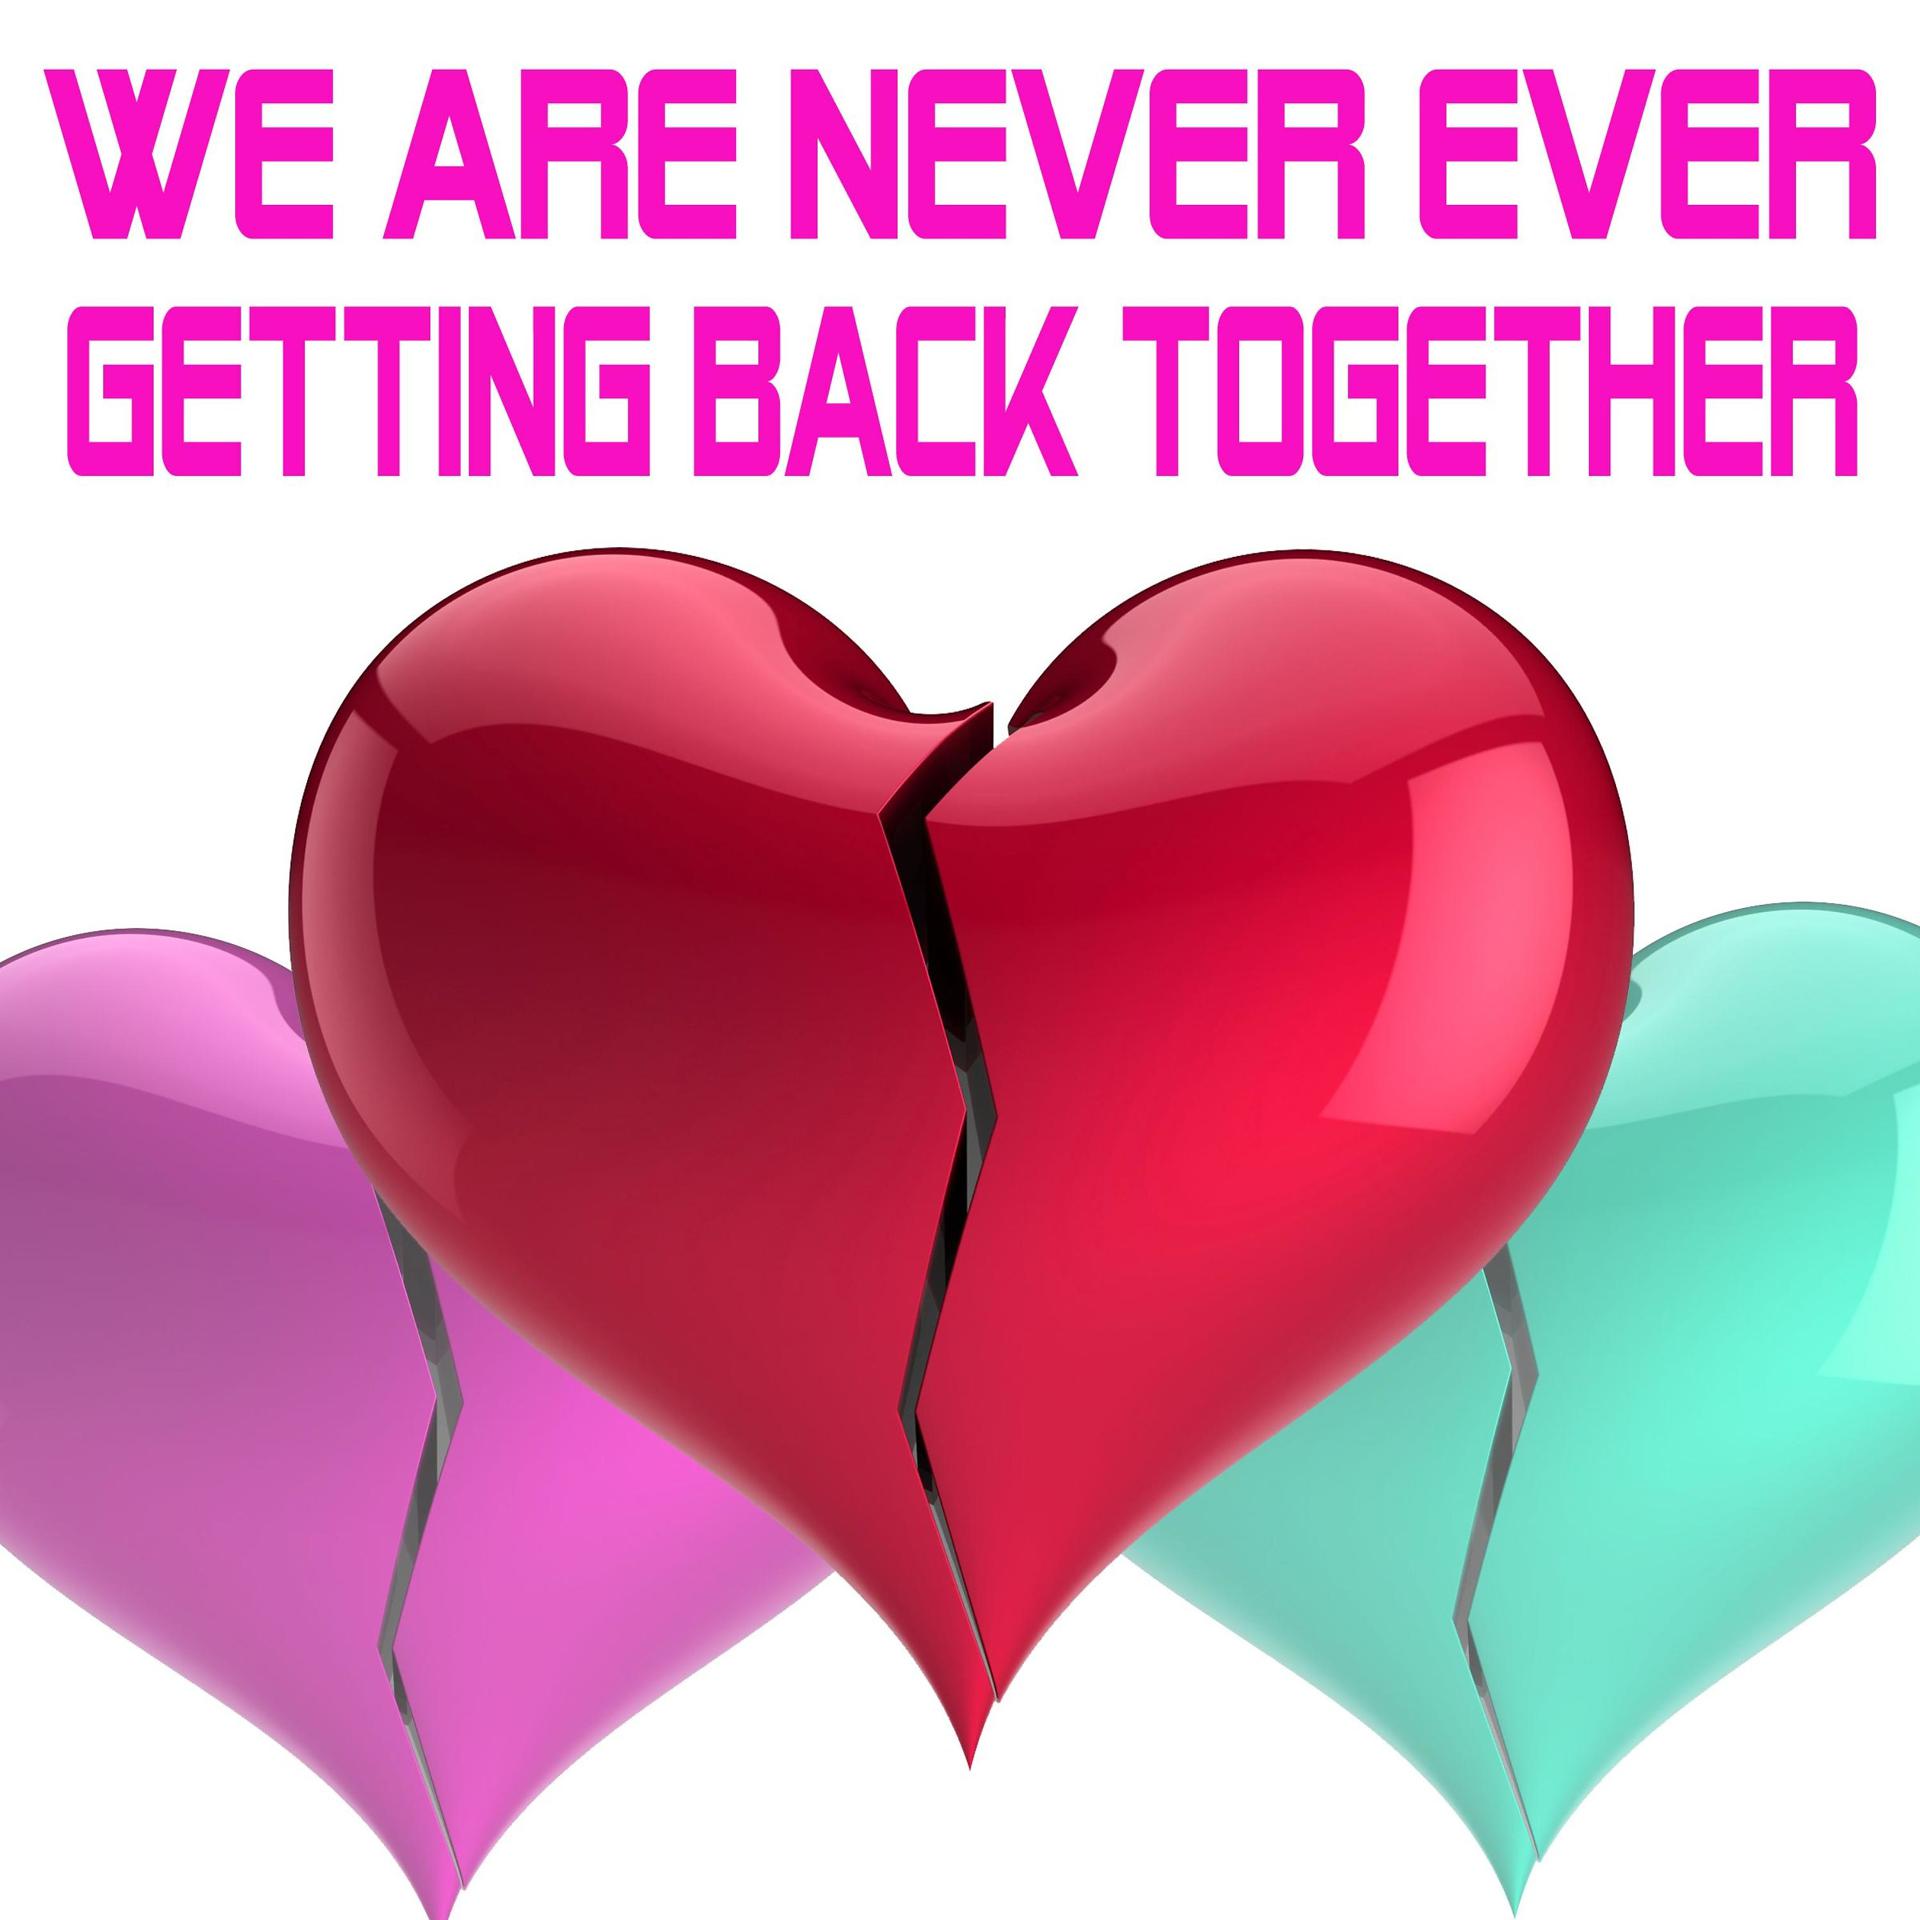 We are together. We are together картинка. We are never ever getting back together. Back together! Картинки. Get back together